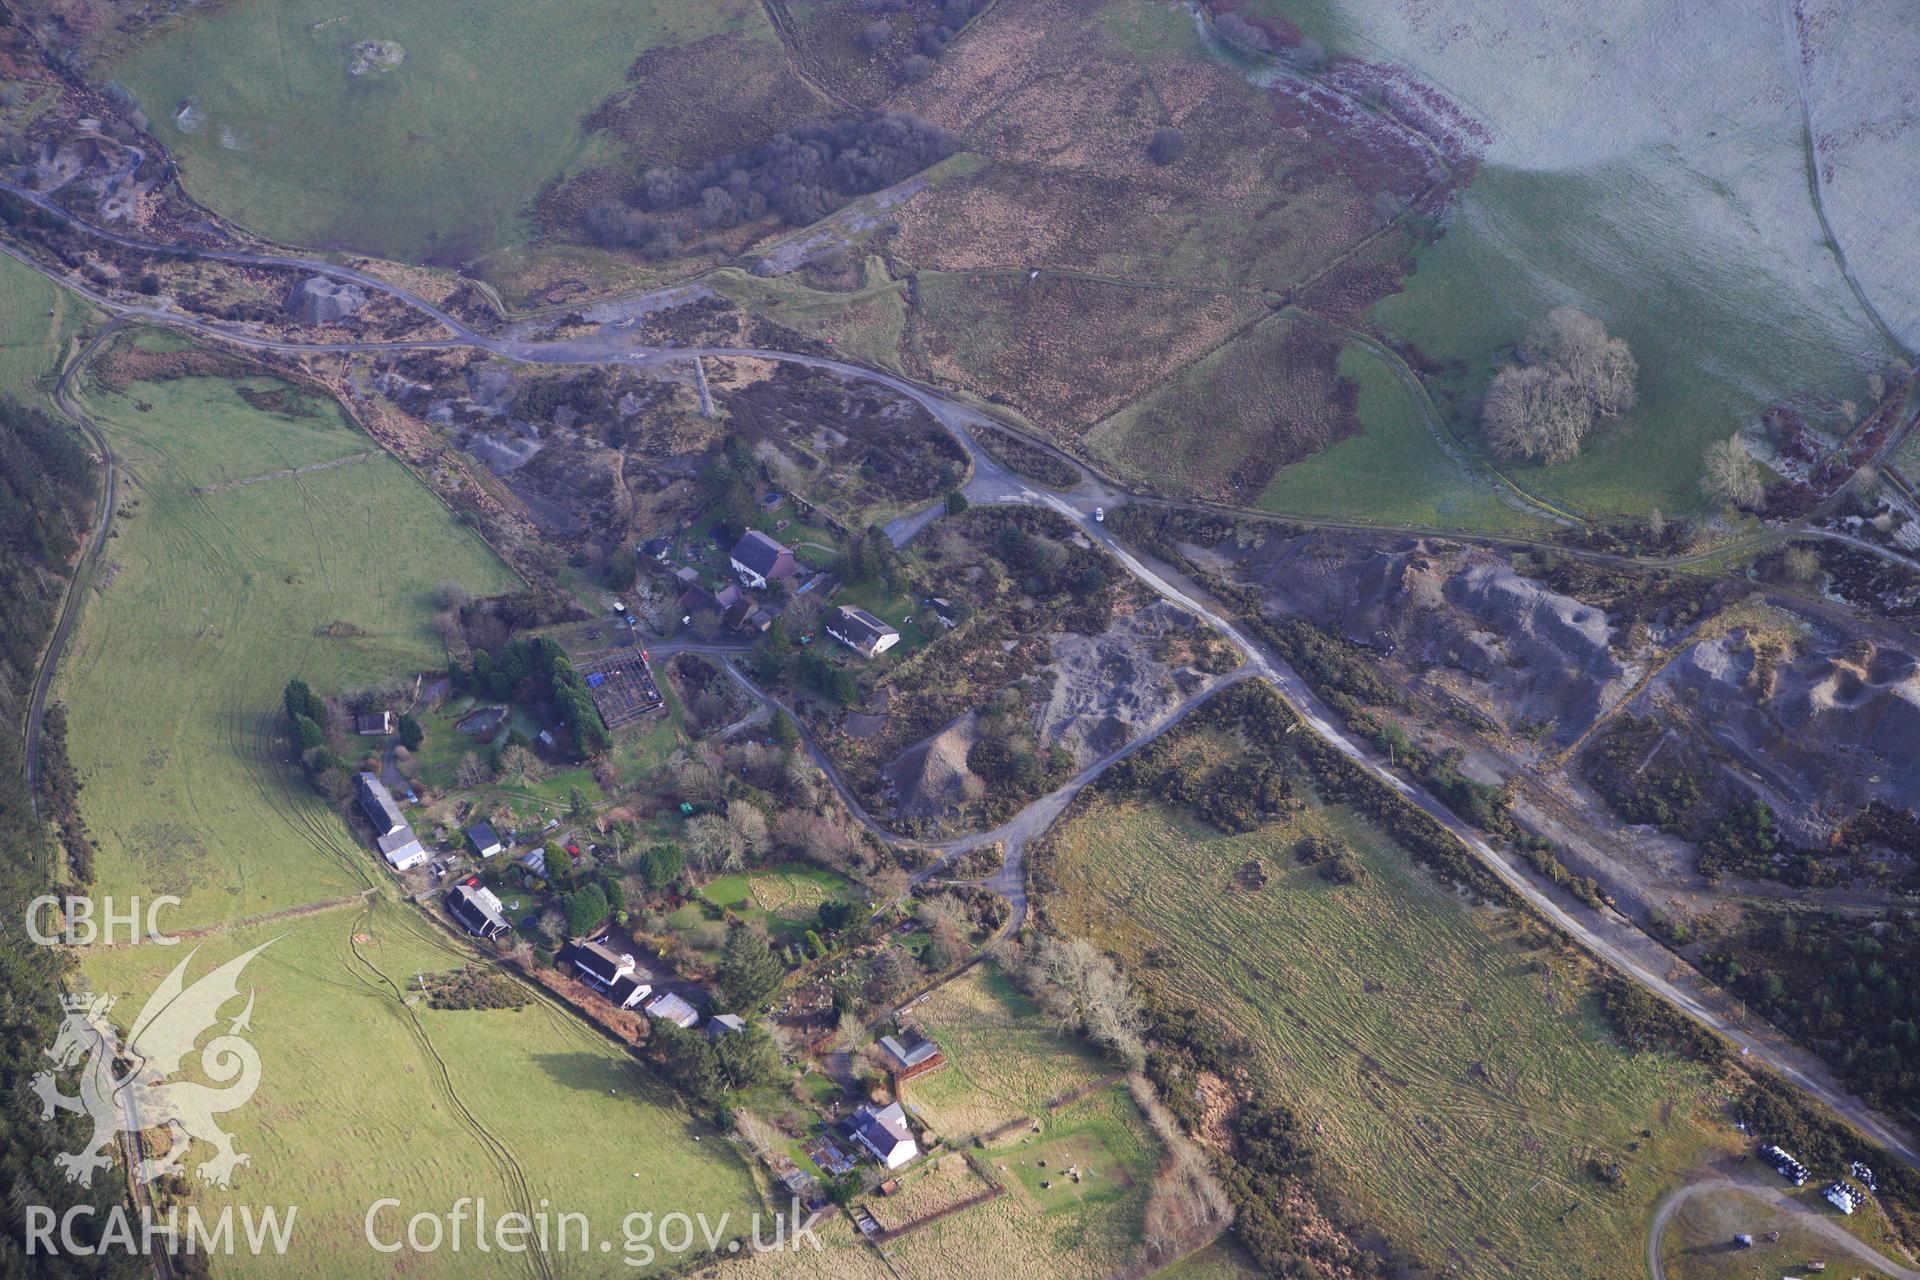 RCAHMW colour oblique photograph of Cwmsymlog Lead Mine, View from North West. Taken by Toby Driver on 07/02/2012.